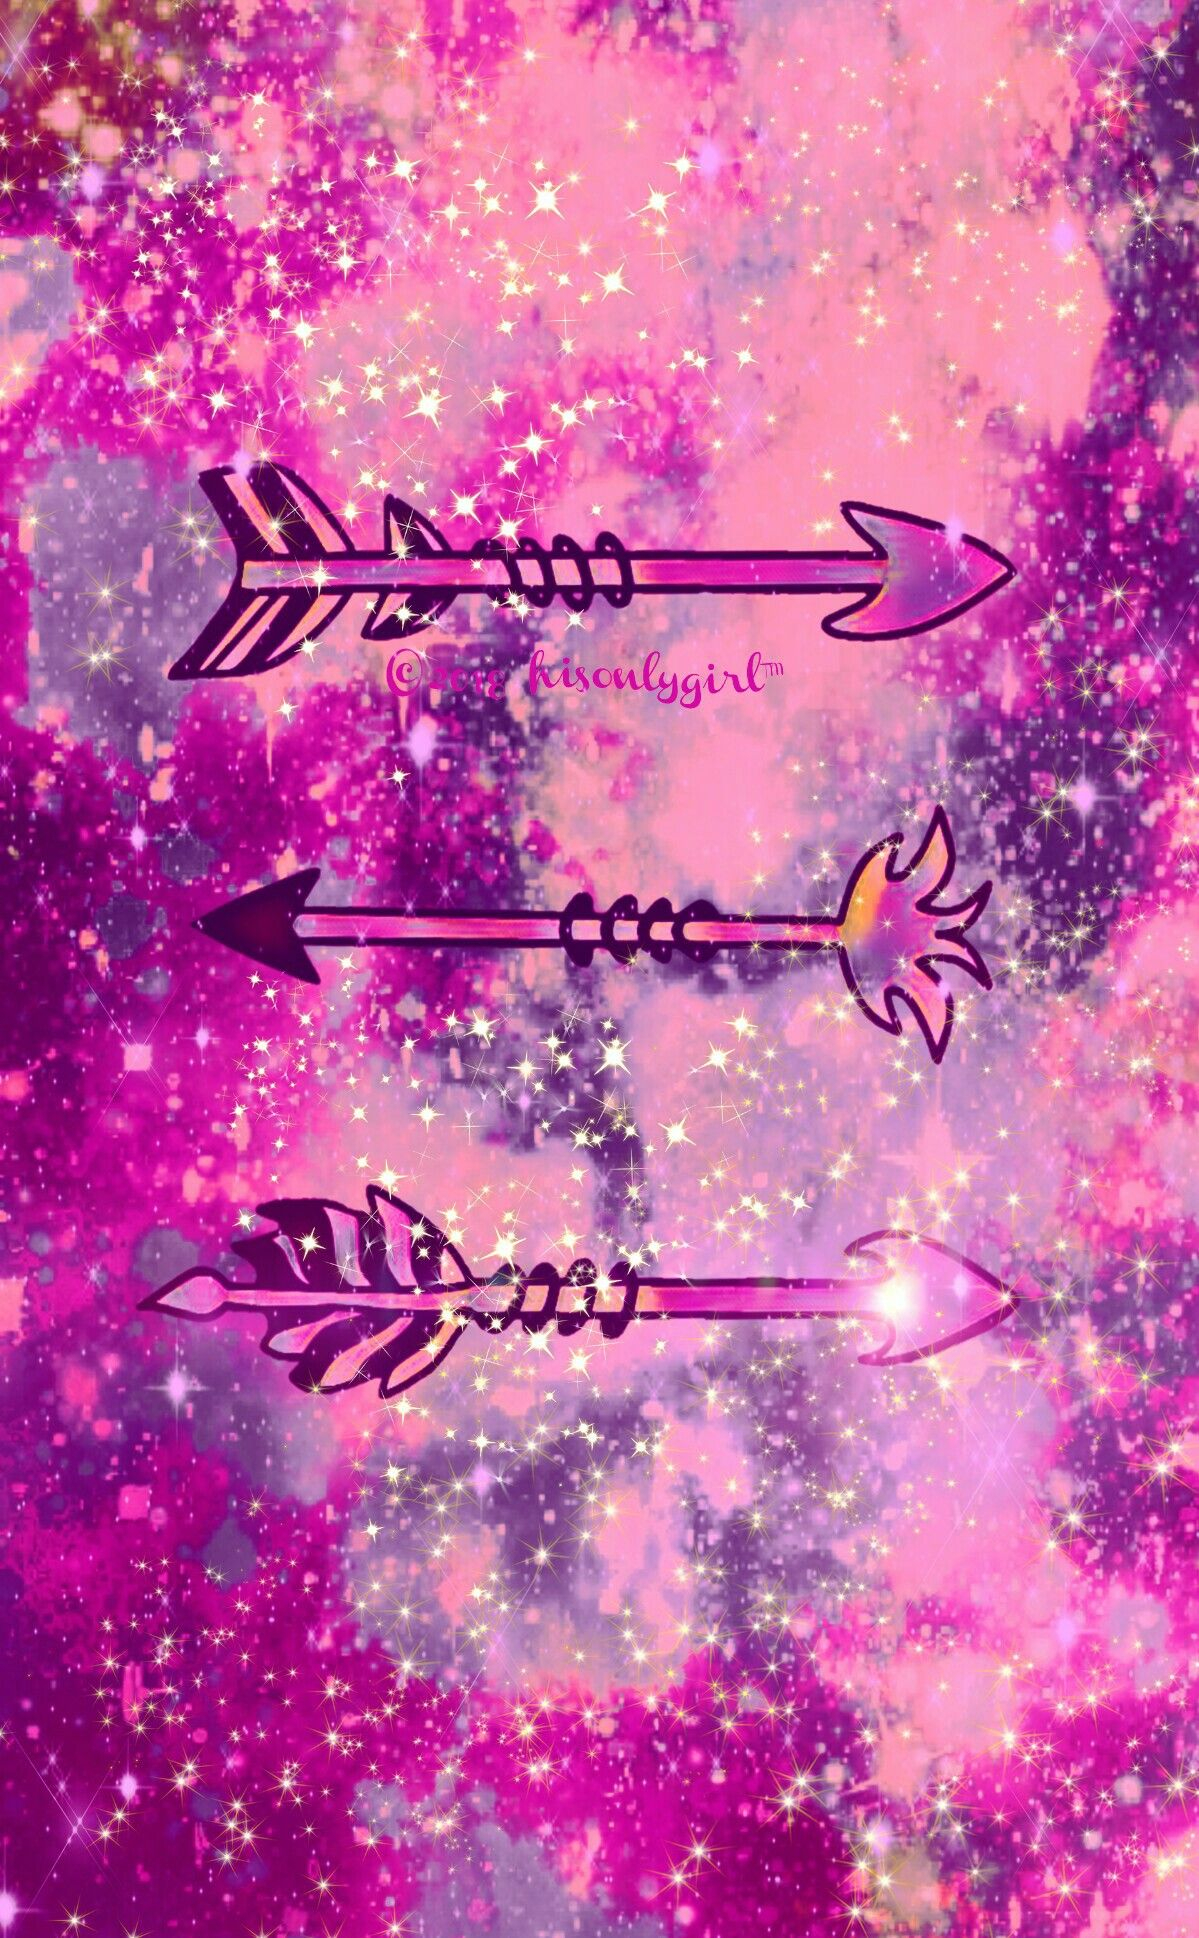 1199x1938 Punk pink galaxy tribal arrows iPhone /Android wallpaper I created for the app CocoPPa! | Galaxy wallpaper, Wallpaper, Android wallpaper